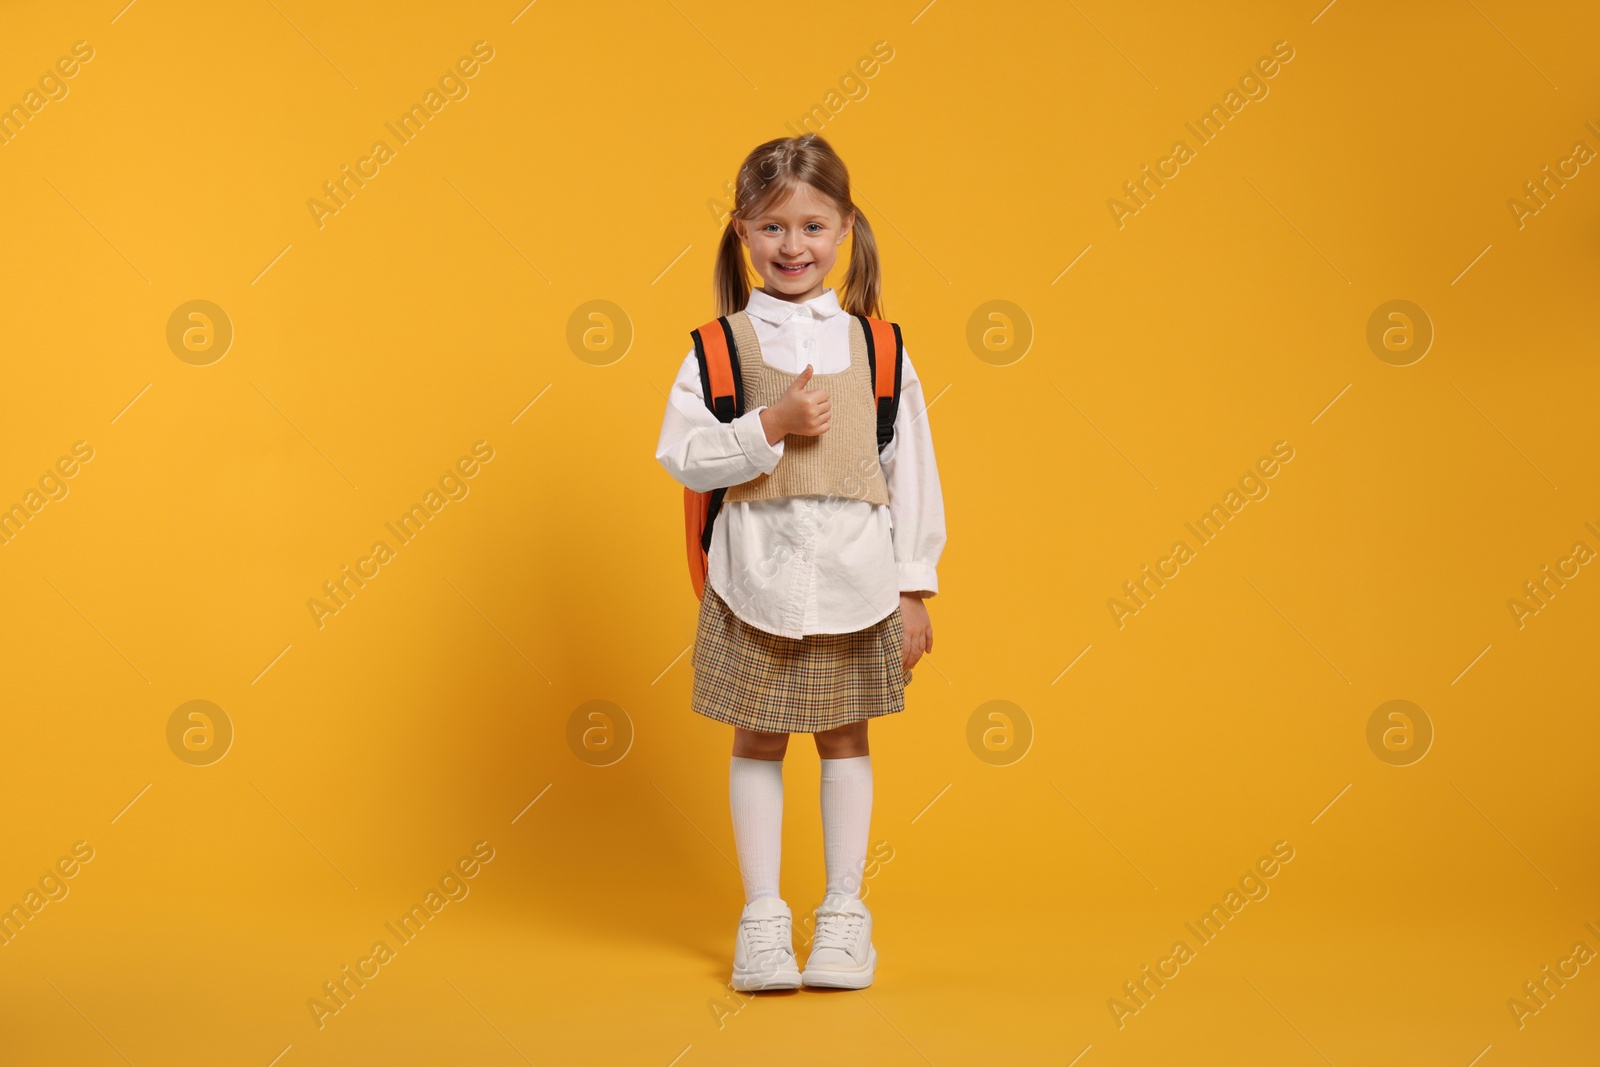 Photo of Happy schoolgirl with backpack showing thumb up gesture on orange background